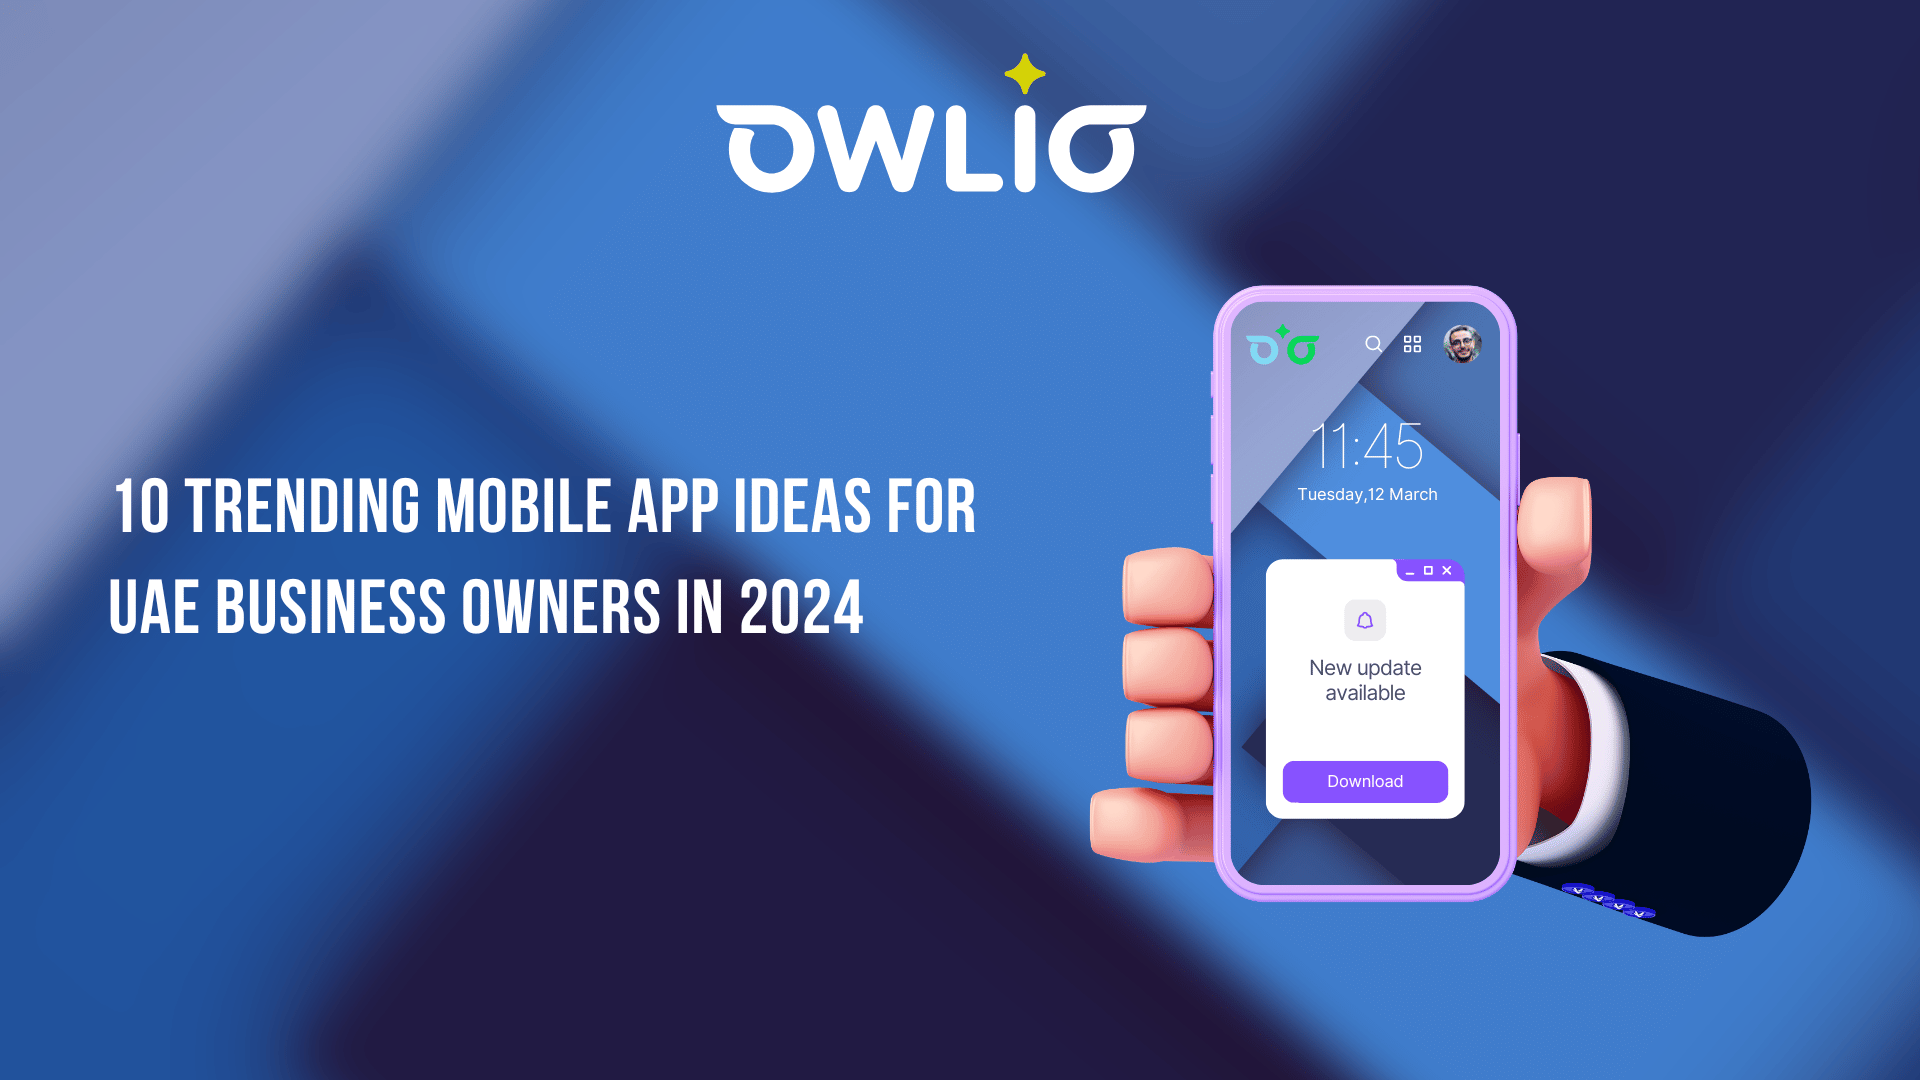 10 Trending Mobile App Ideas for UAE Business Owners in 2024